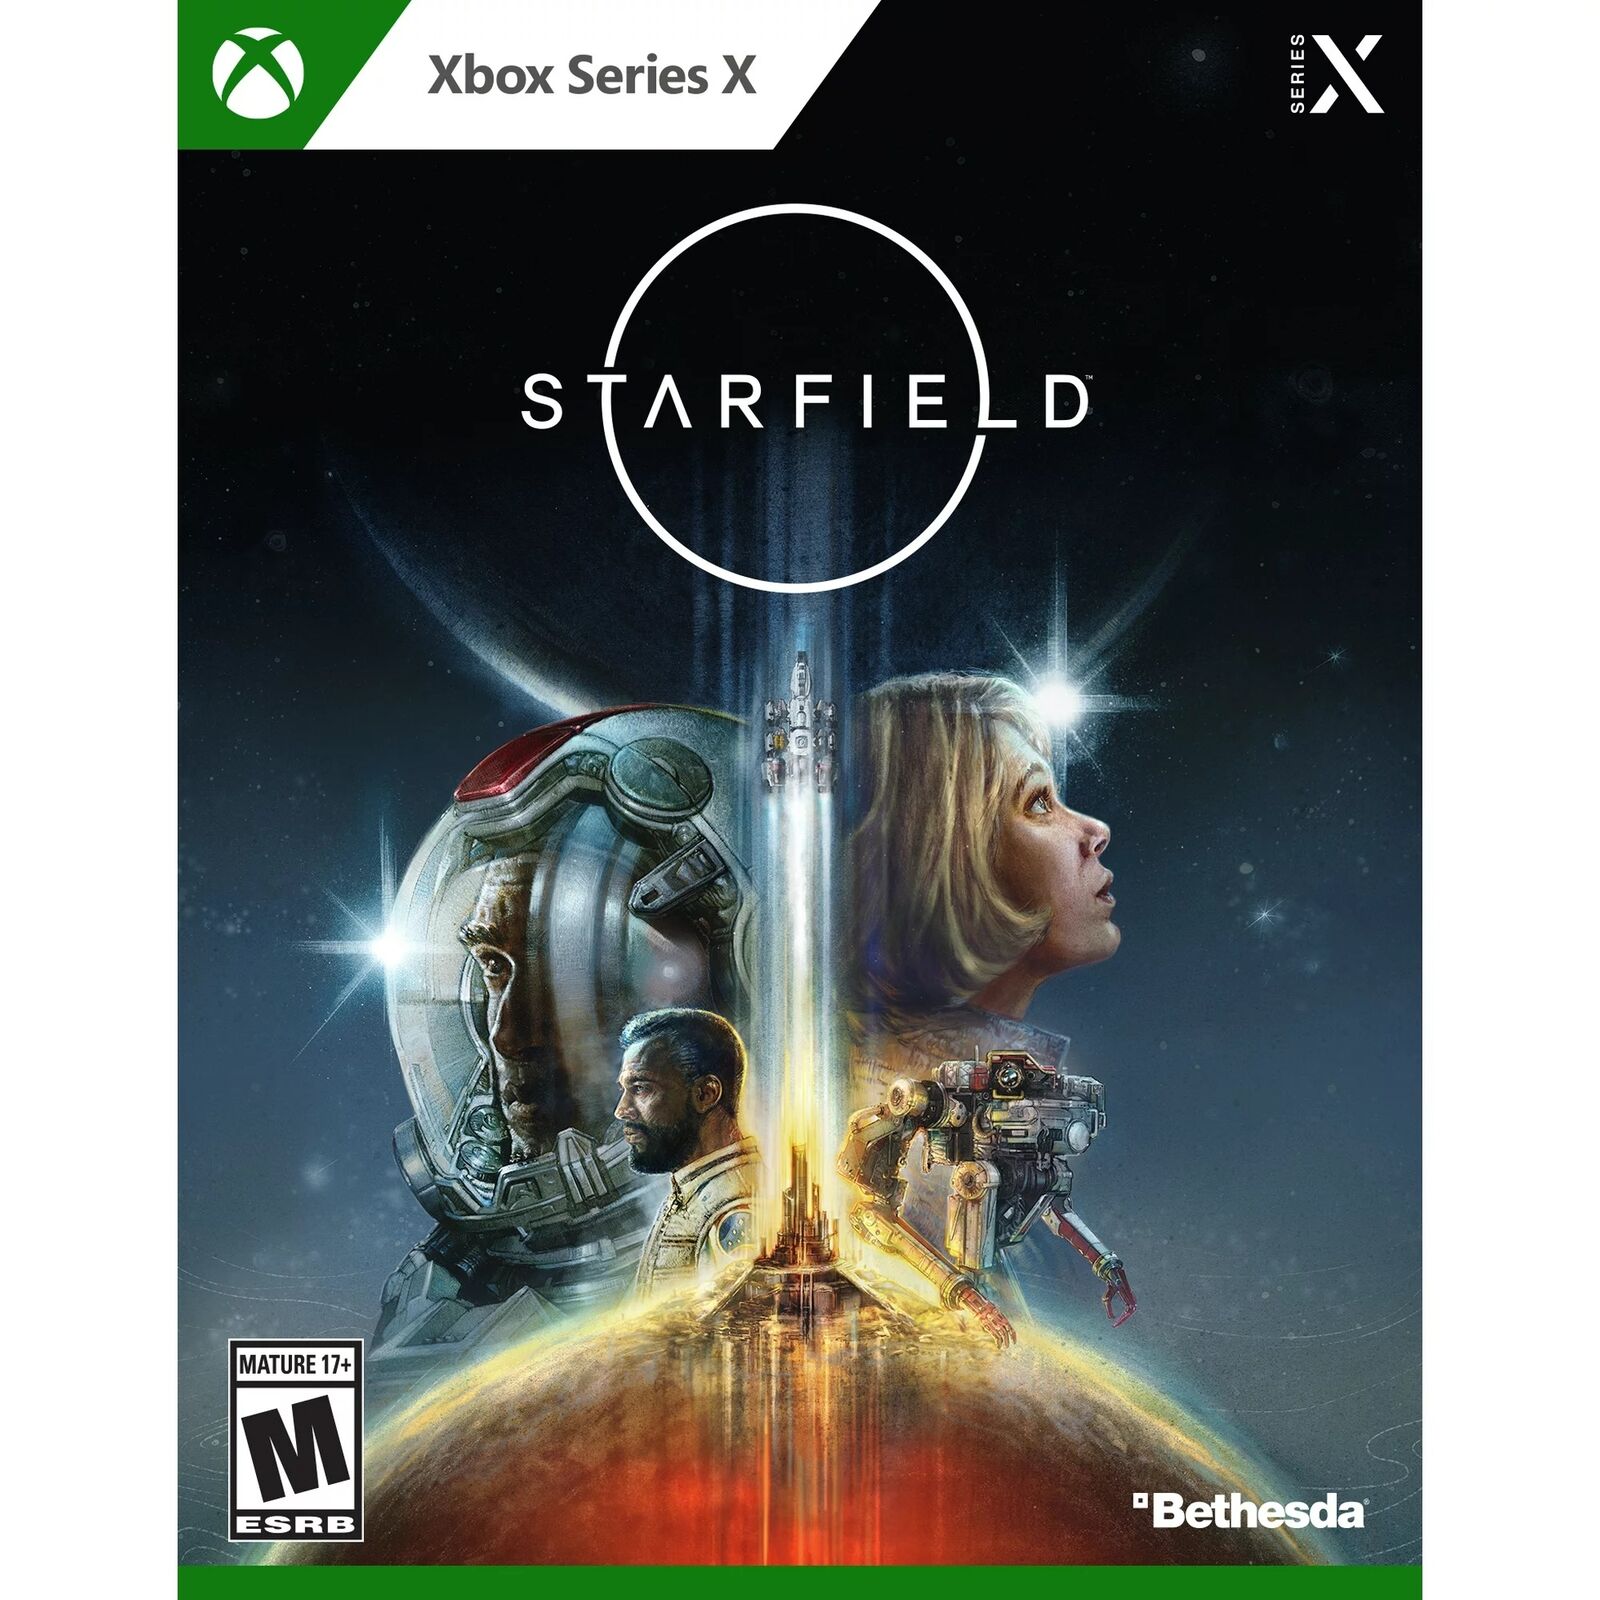 Starfield - Physical Disc (XBOX Series X) $24 + Free Shipping eBay